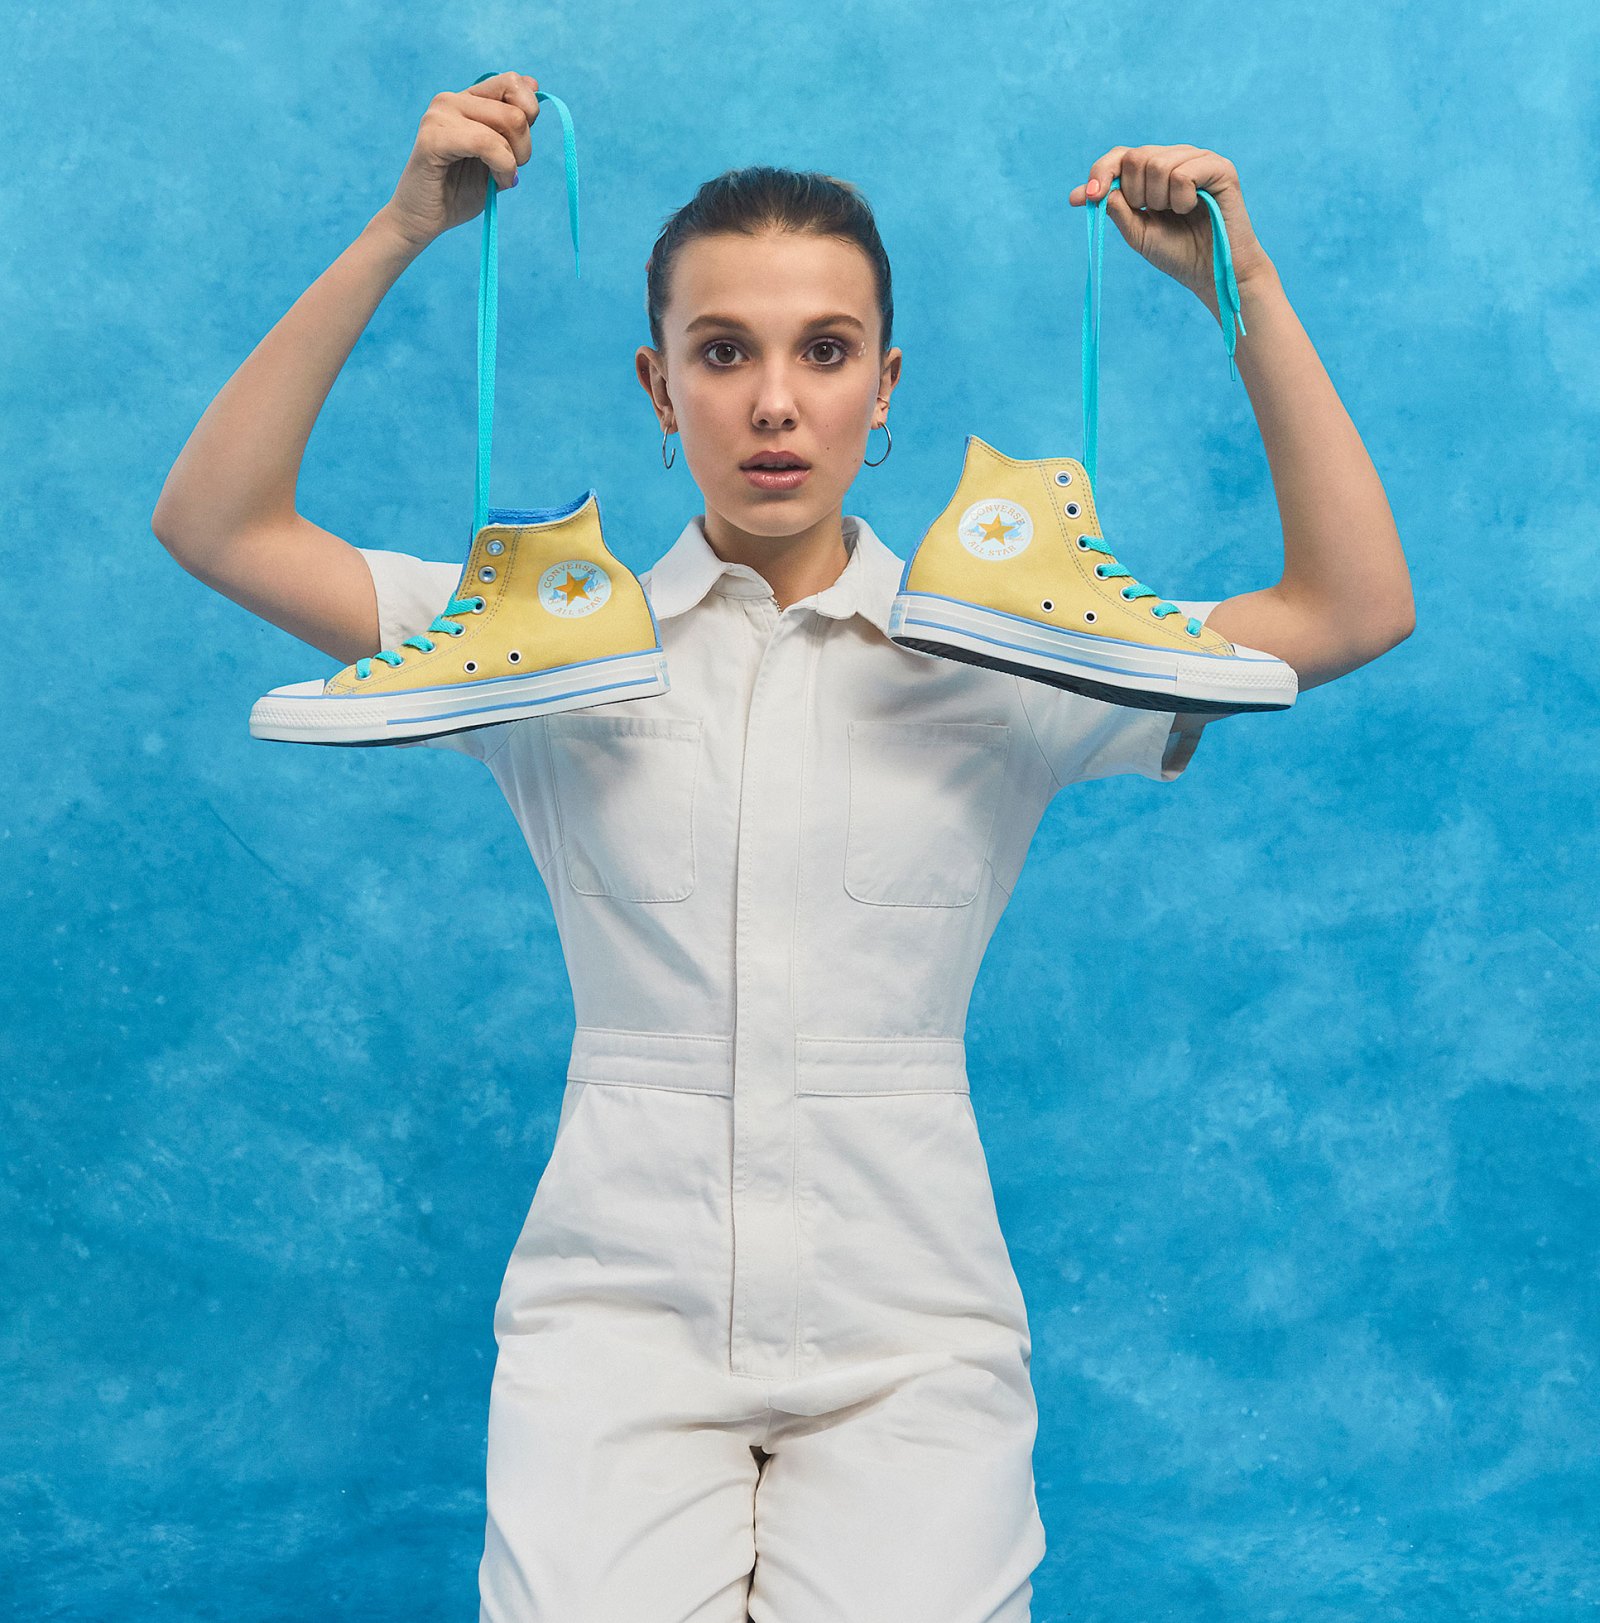 Millie Bobby Brown Converse Collaboration